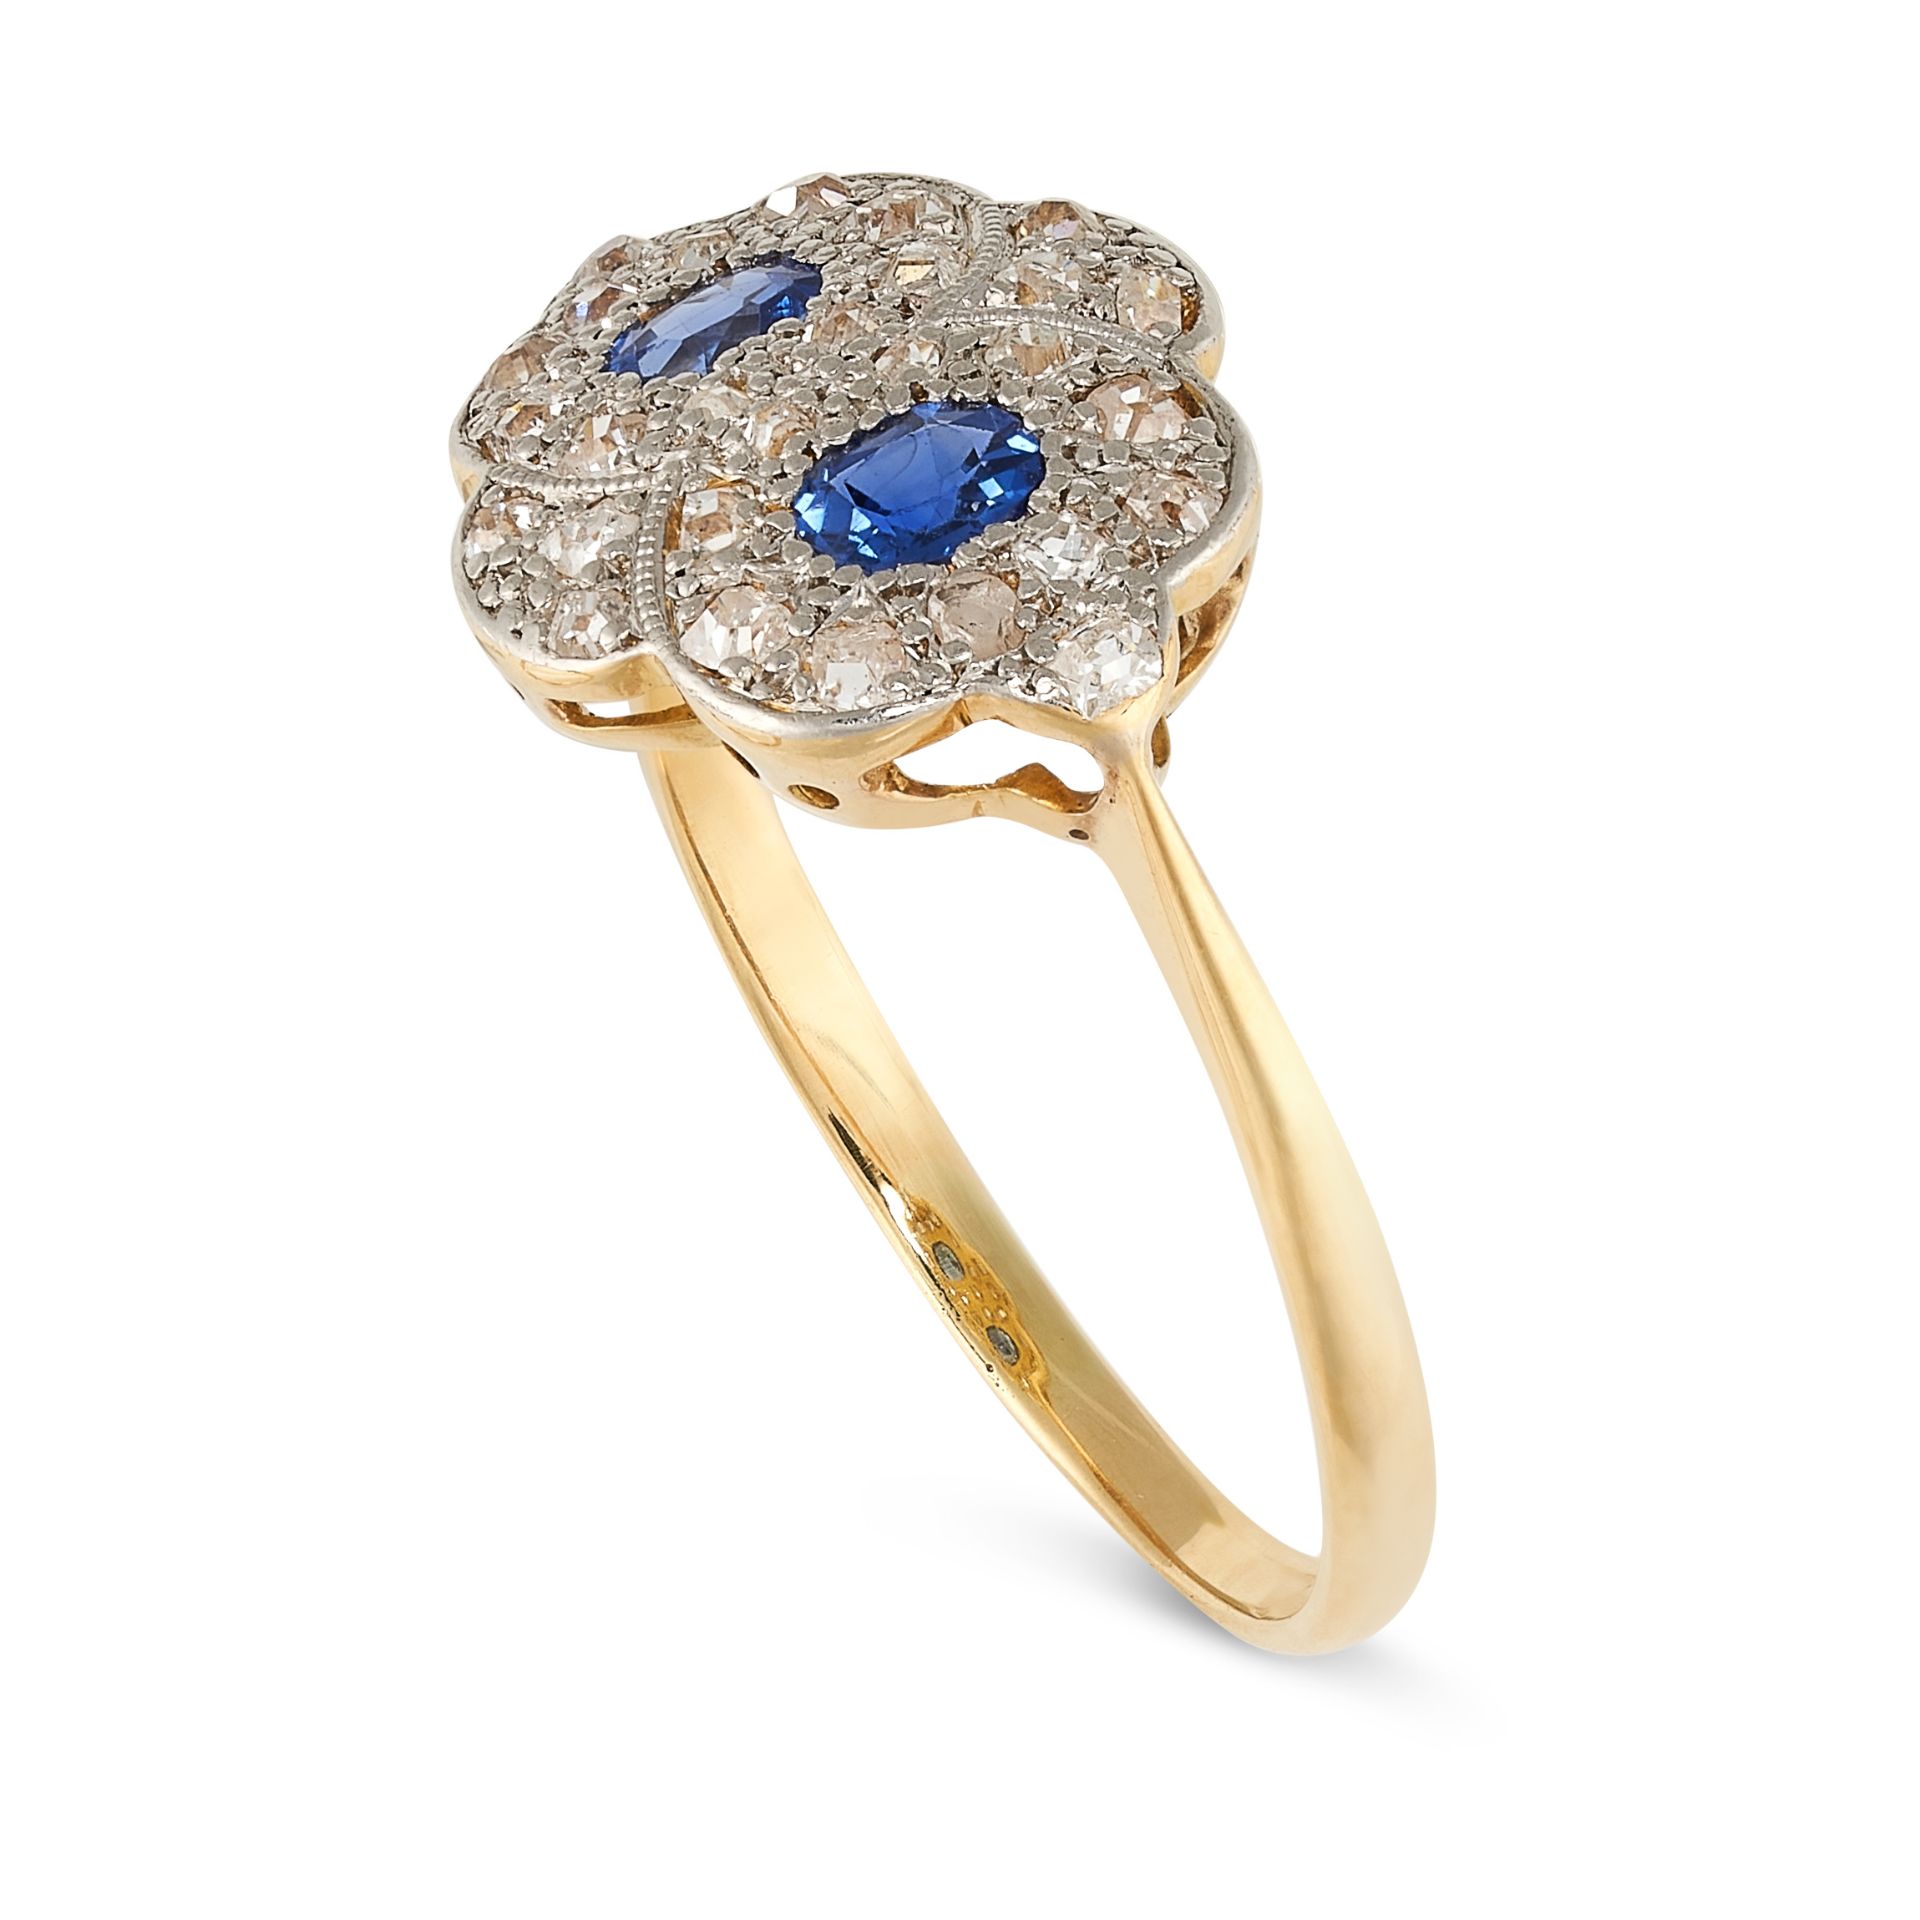 NO RESERVE - A SAPPHIRE AND DIAMOND RING in 18ct yellow gold and platinum, the scalloped face set - Image 2 of 2